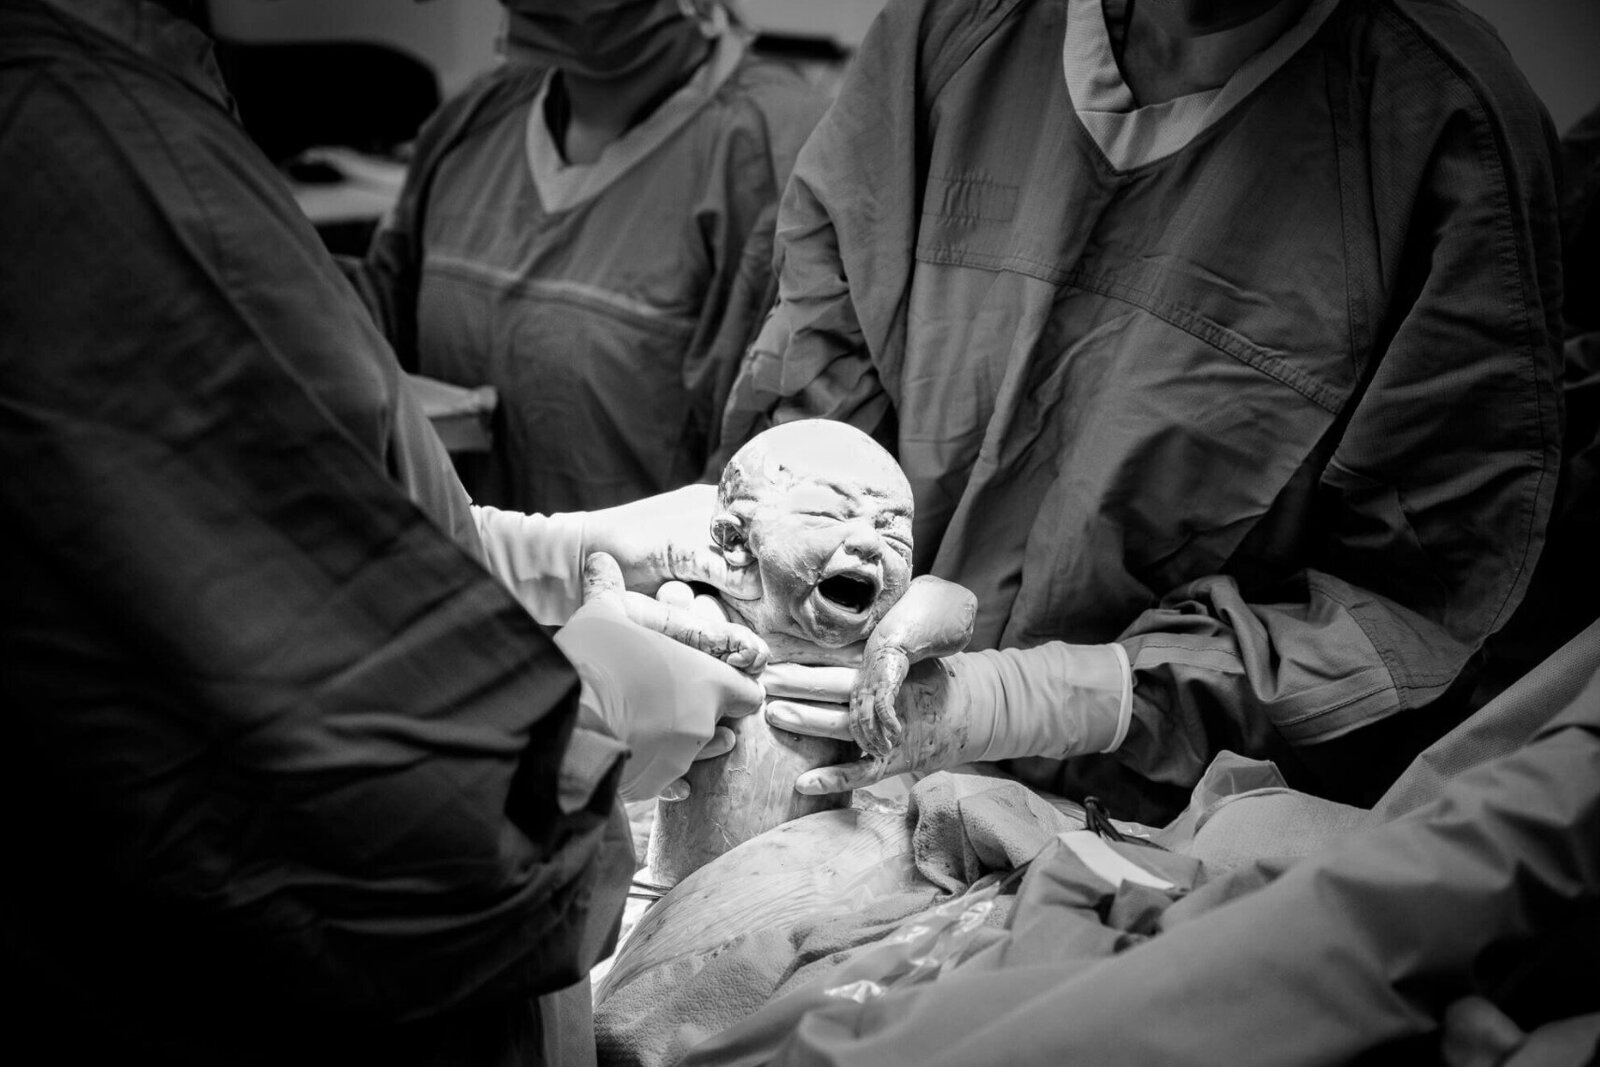 newborn baby just delivered by c-section